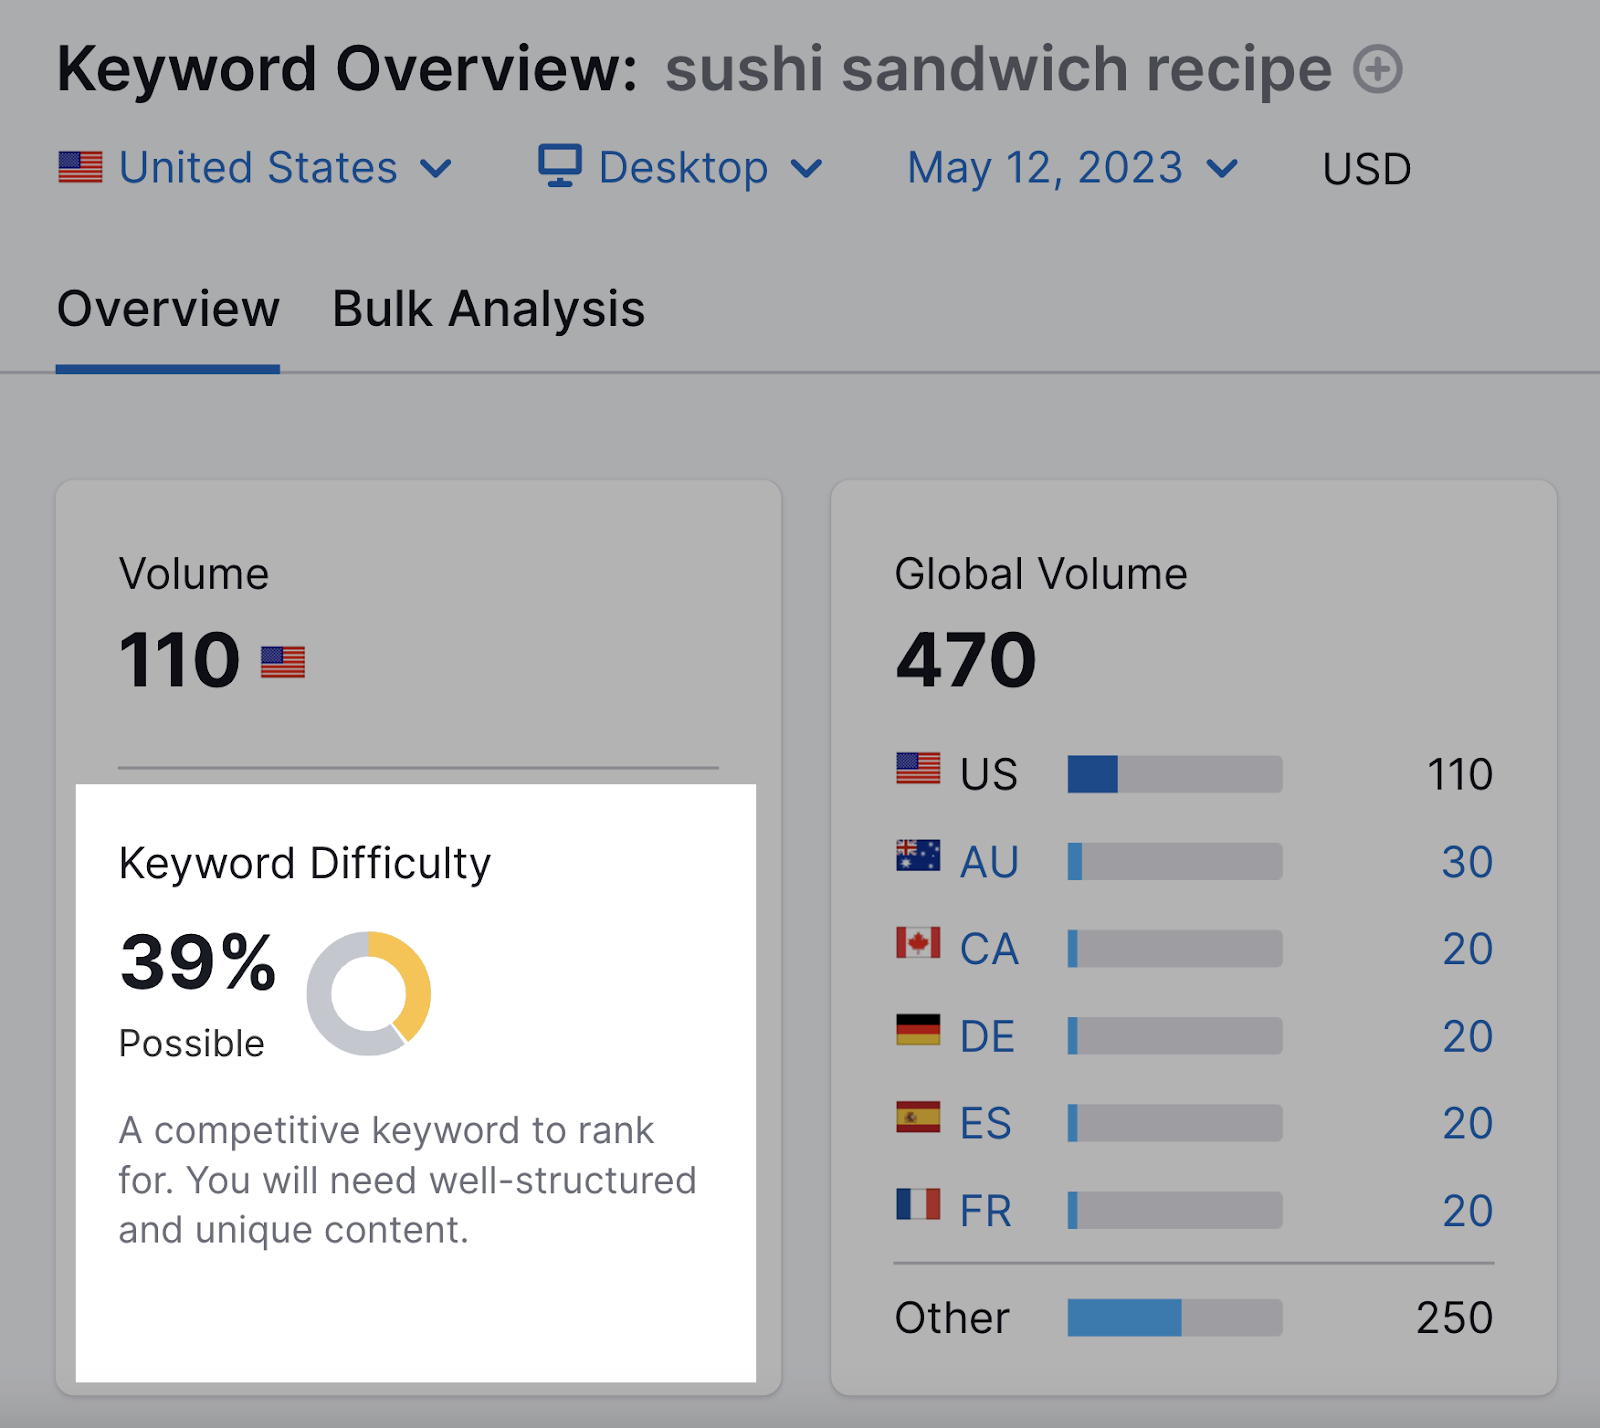 "Keyword Difficulty" metric for “sushi sandwich recipe” in Keyword Overview tool is 39%